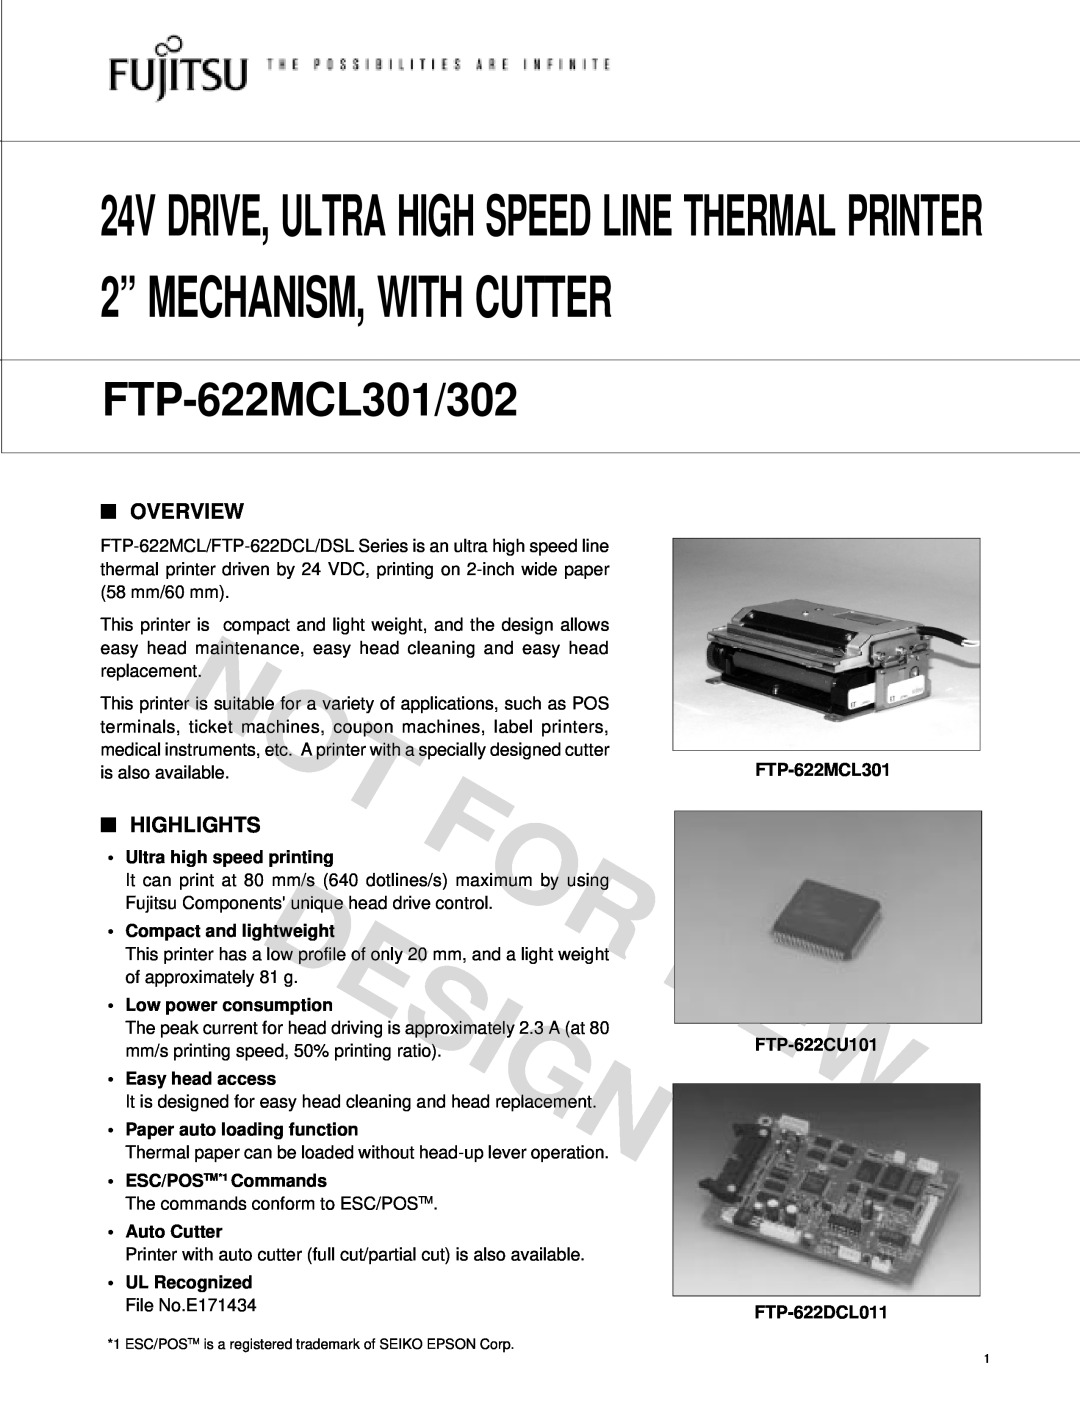 Fujitsu FTP-622MCL302 manual Overview, Highlights, Design, 2” MECHANISM, WITH CUTTER, FTP-622MCL301/302 